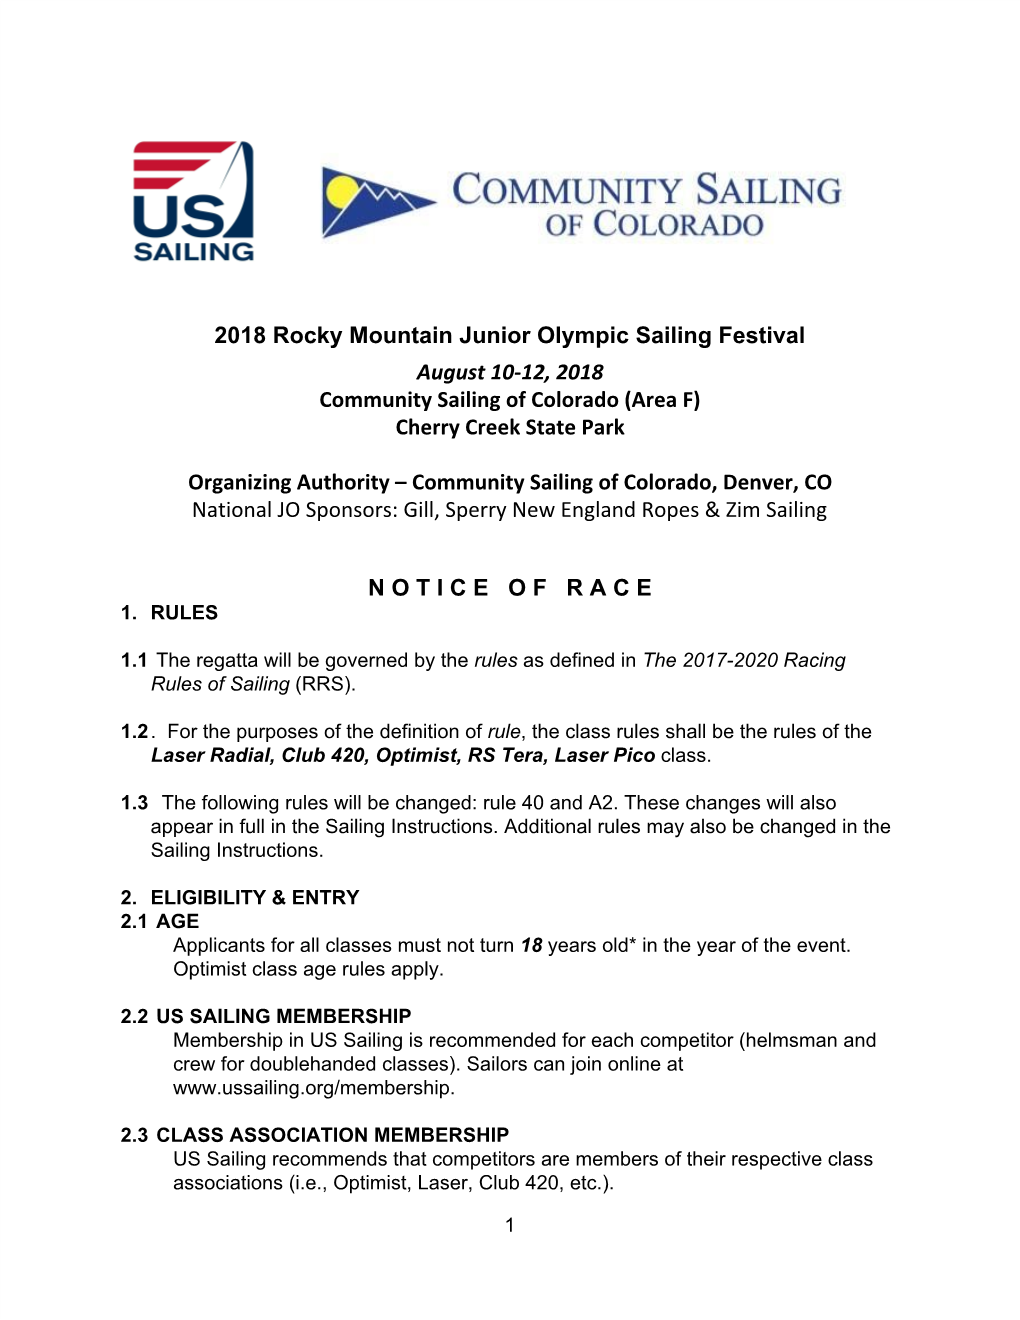 2018 Rocky Mountain Junior Olympic Sailing Festival August 10-12, 2018 Community Sailing of Colorado (Area F) Cherry Creek State Park